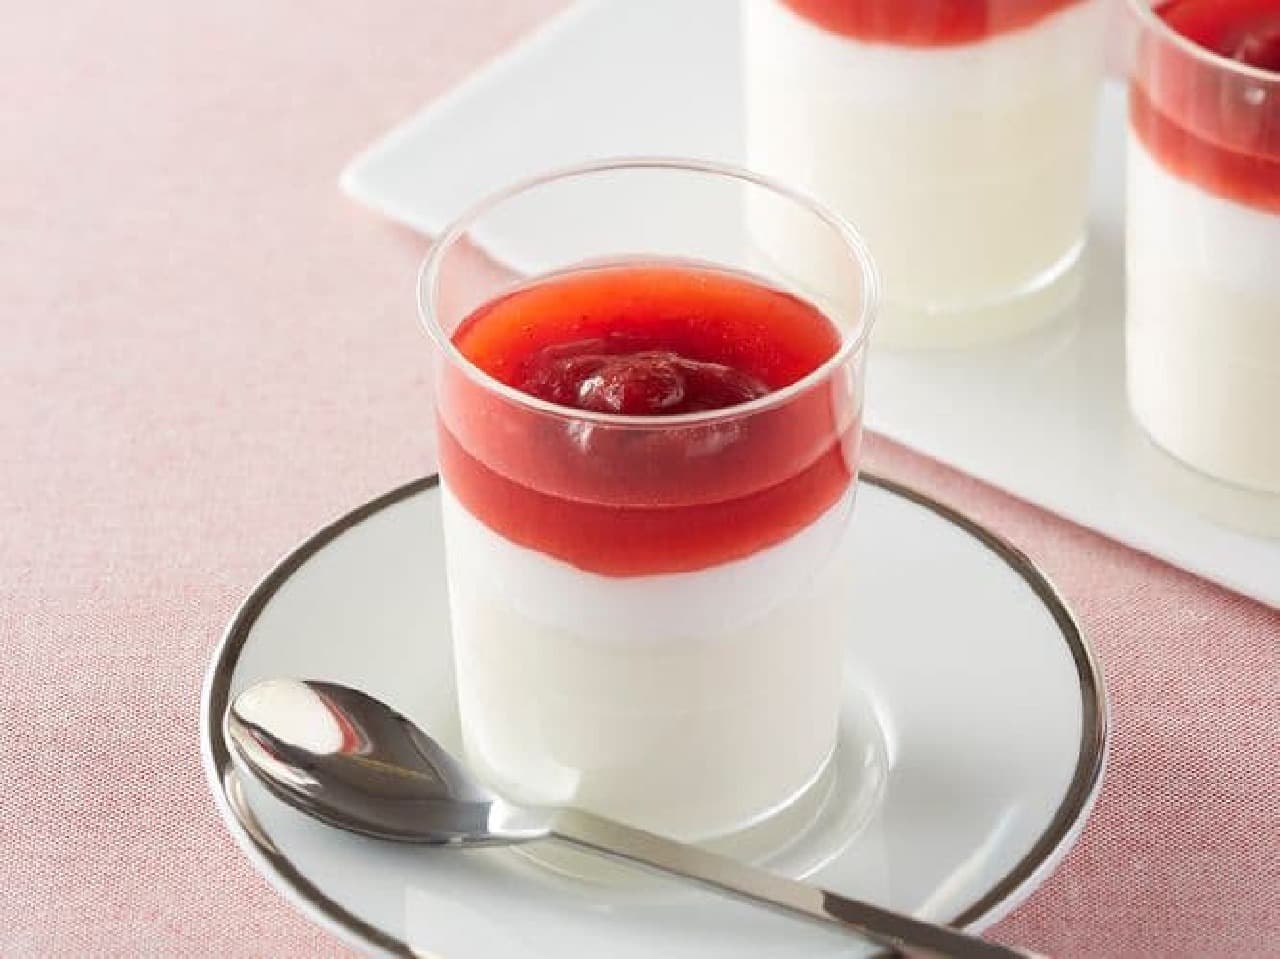 Ministop "Melted Raw Panna Cotta Strawberry